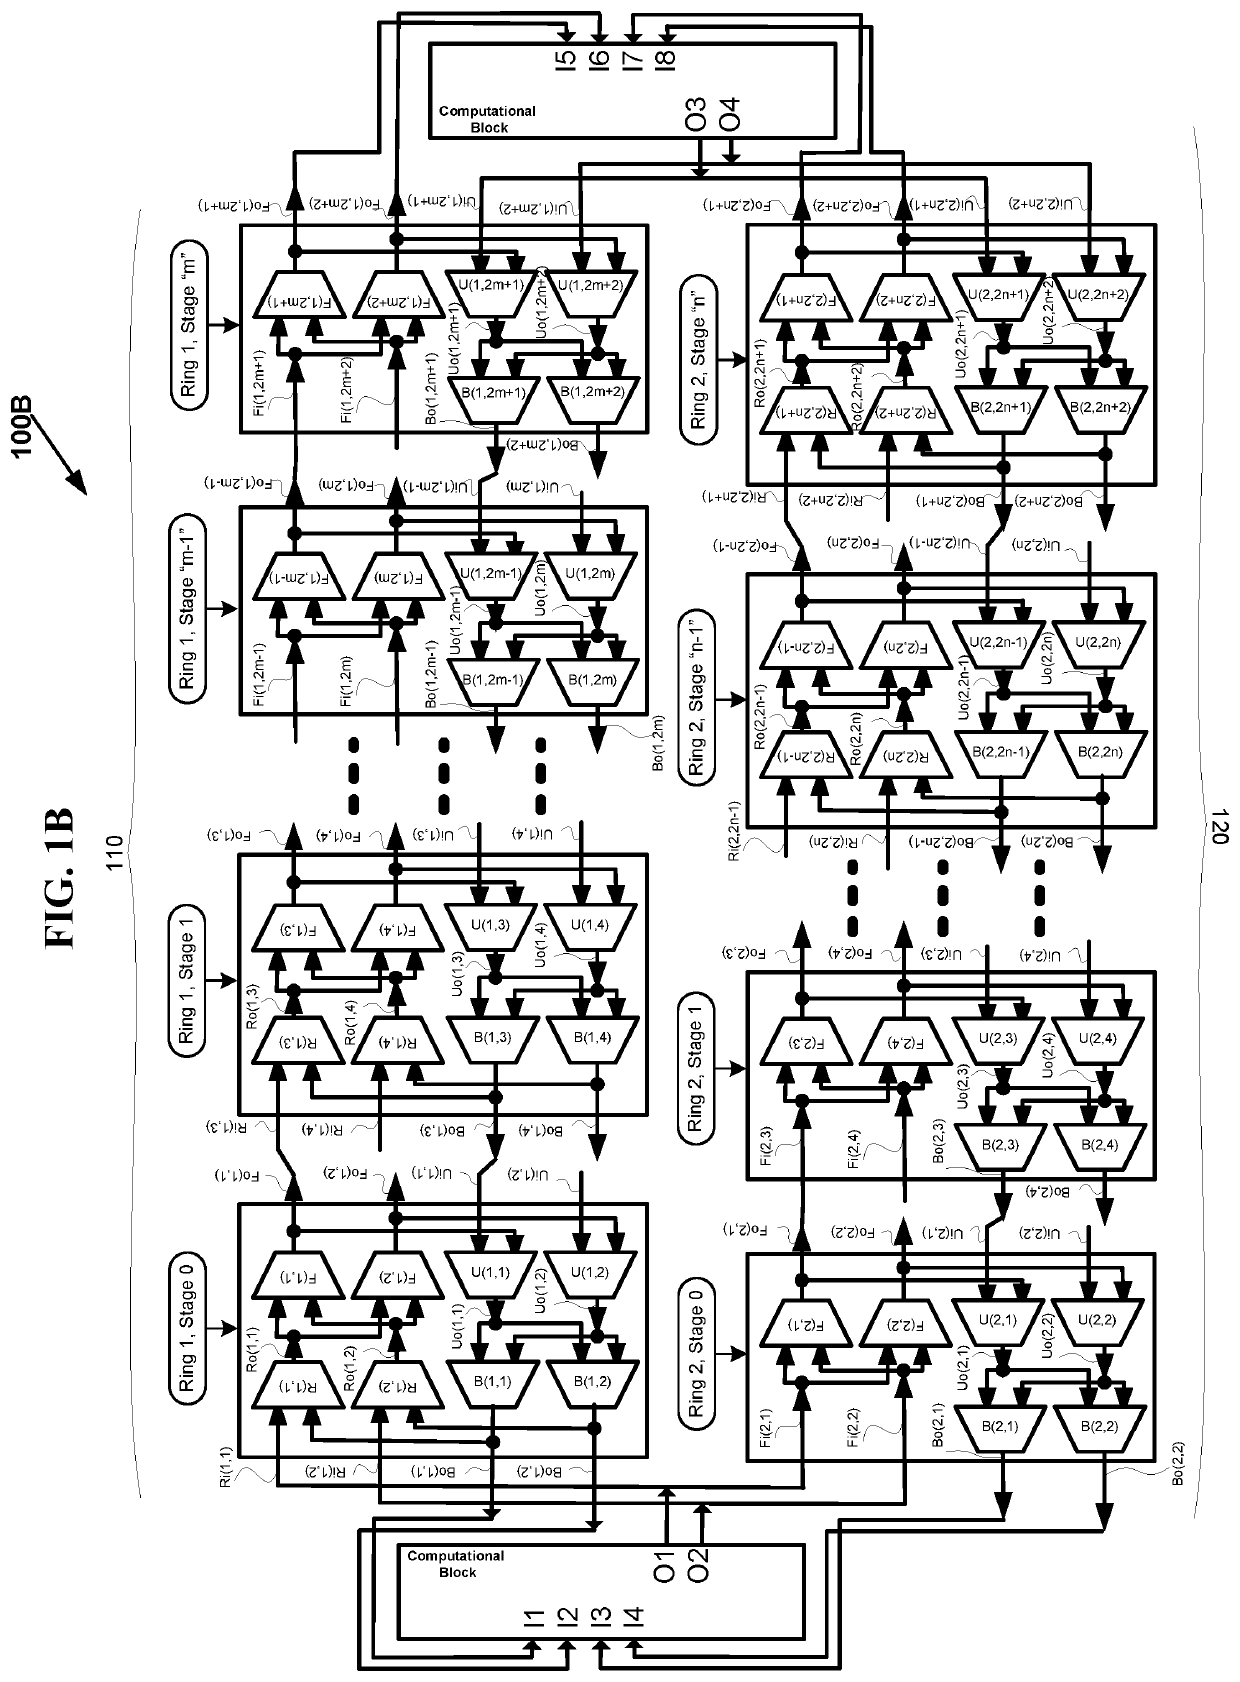 Fast scheduling and optimization of multi-stage hierarchical networks